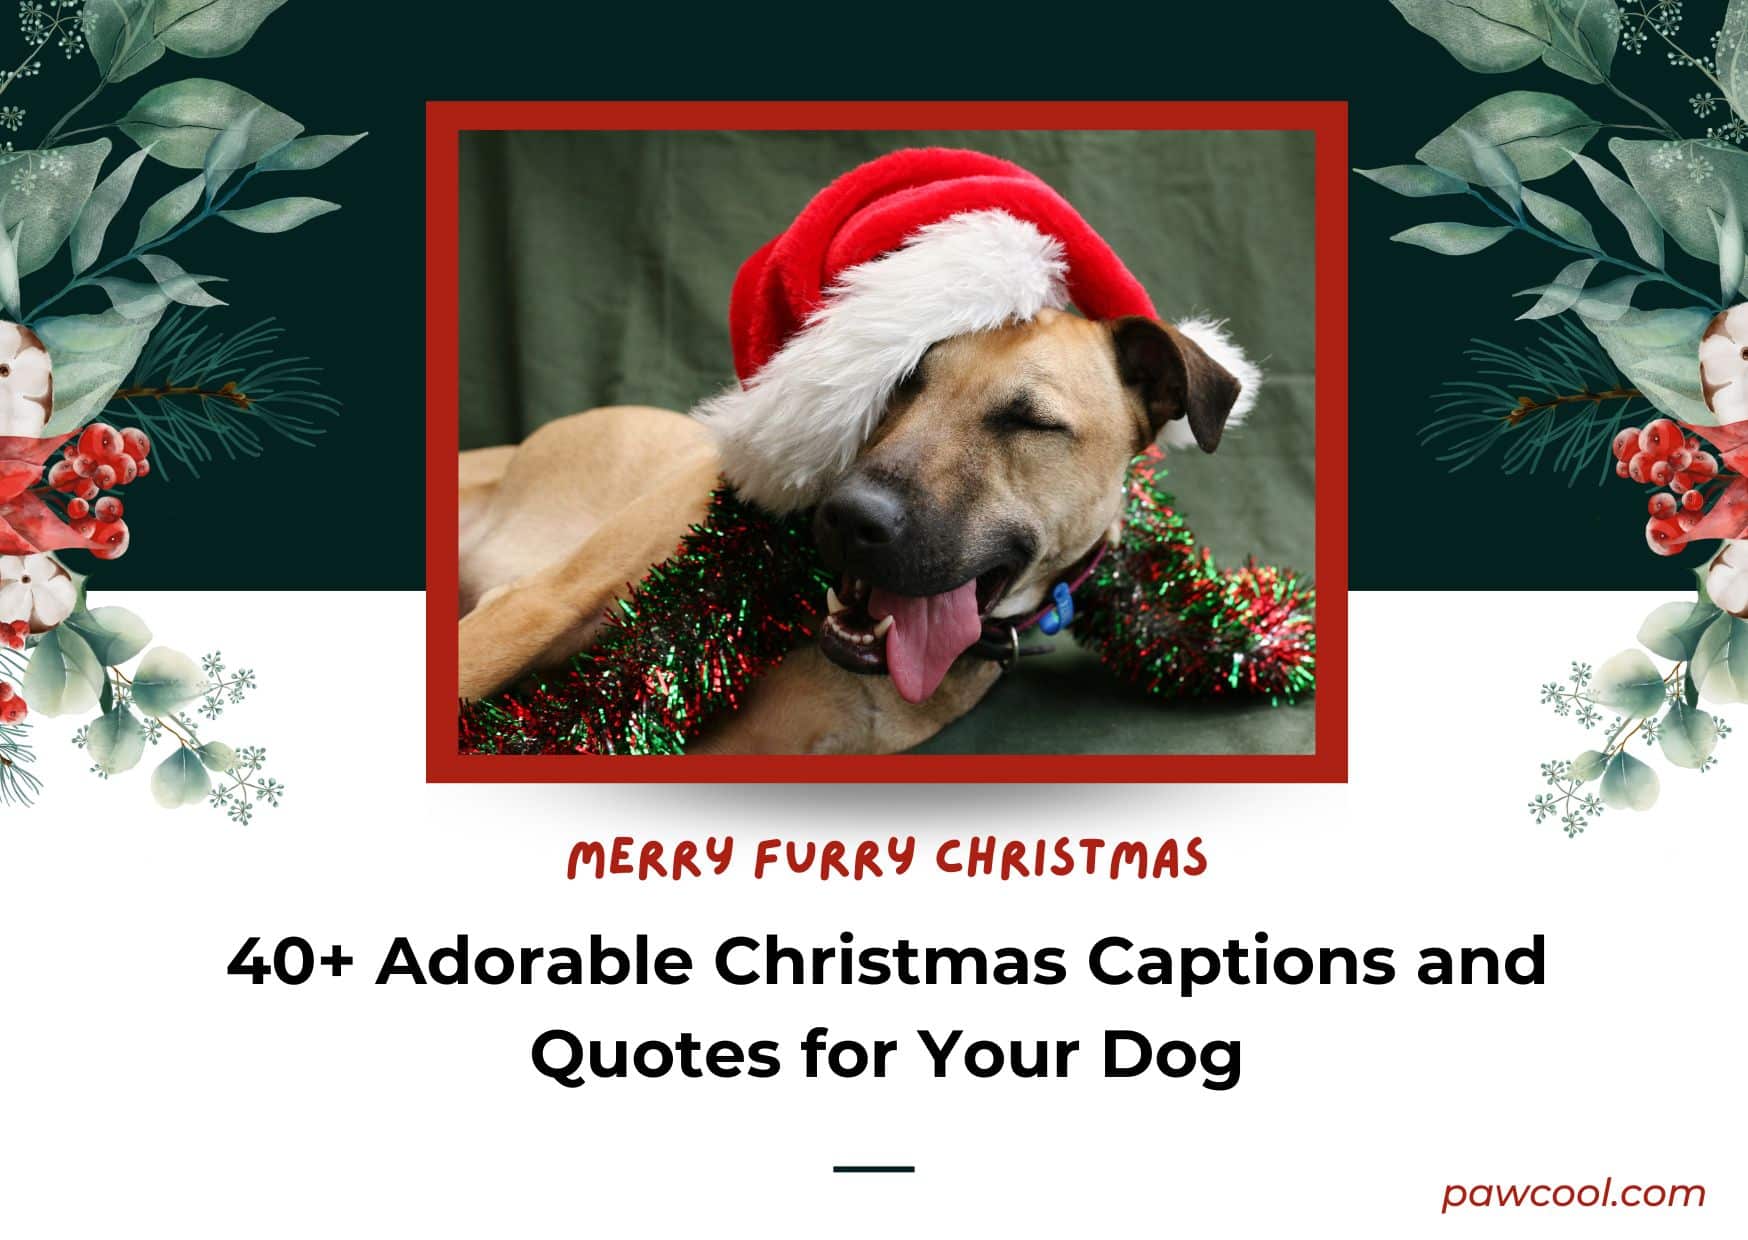 Adorable Christmas Dog Captions and Quotes